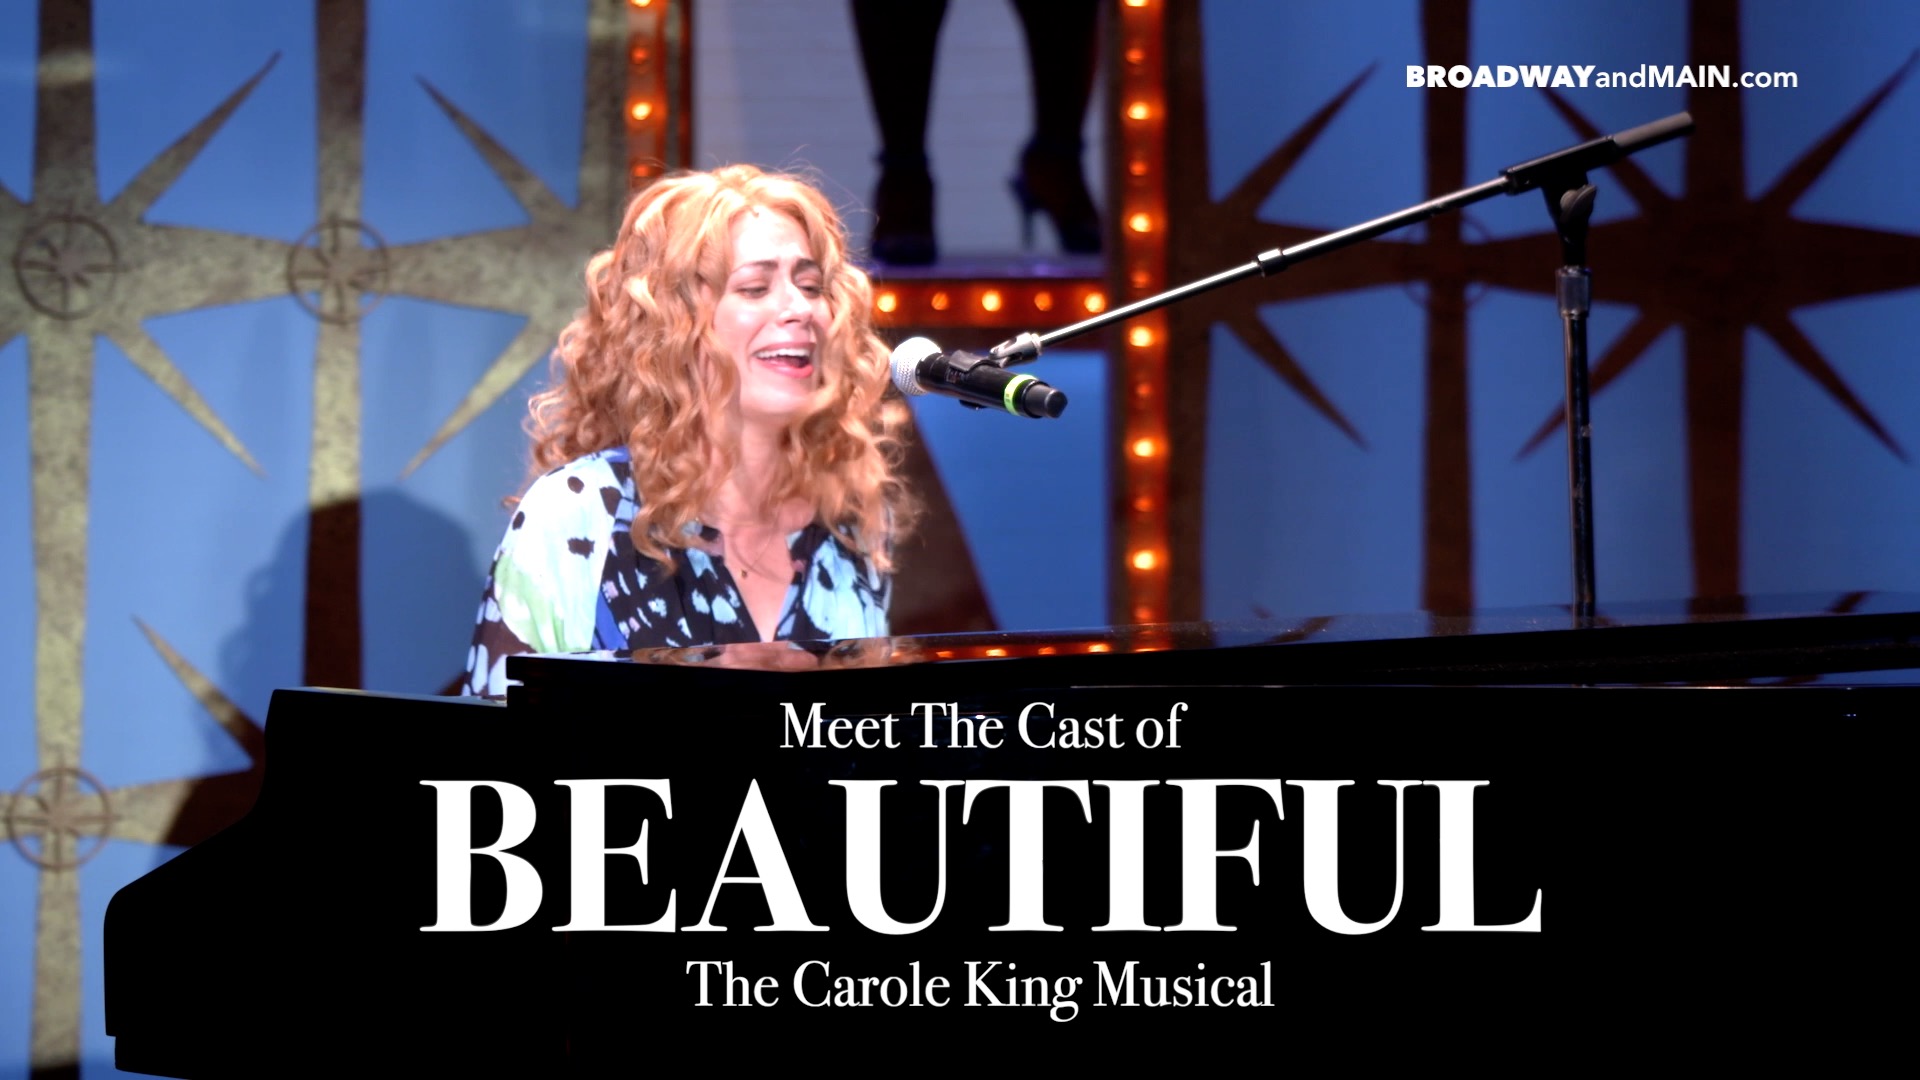 Meet The Cast of Beautiful The Carole King Musical at the JW Engeman Theater